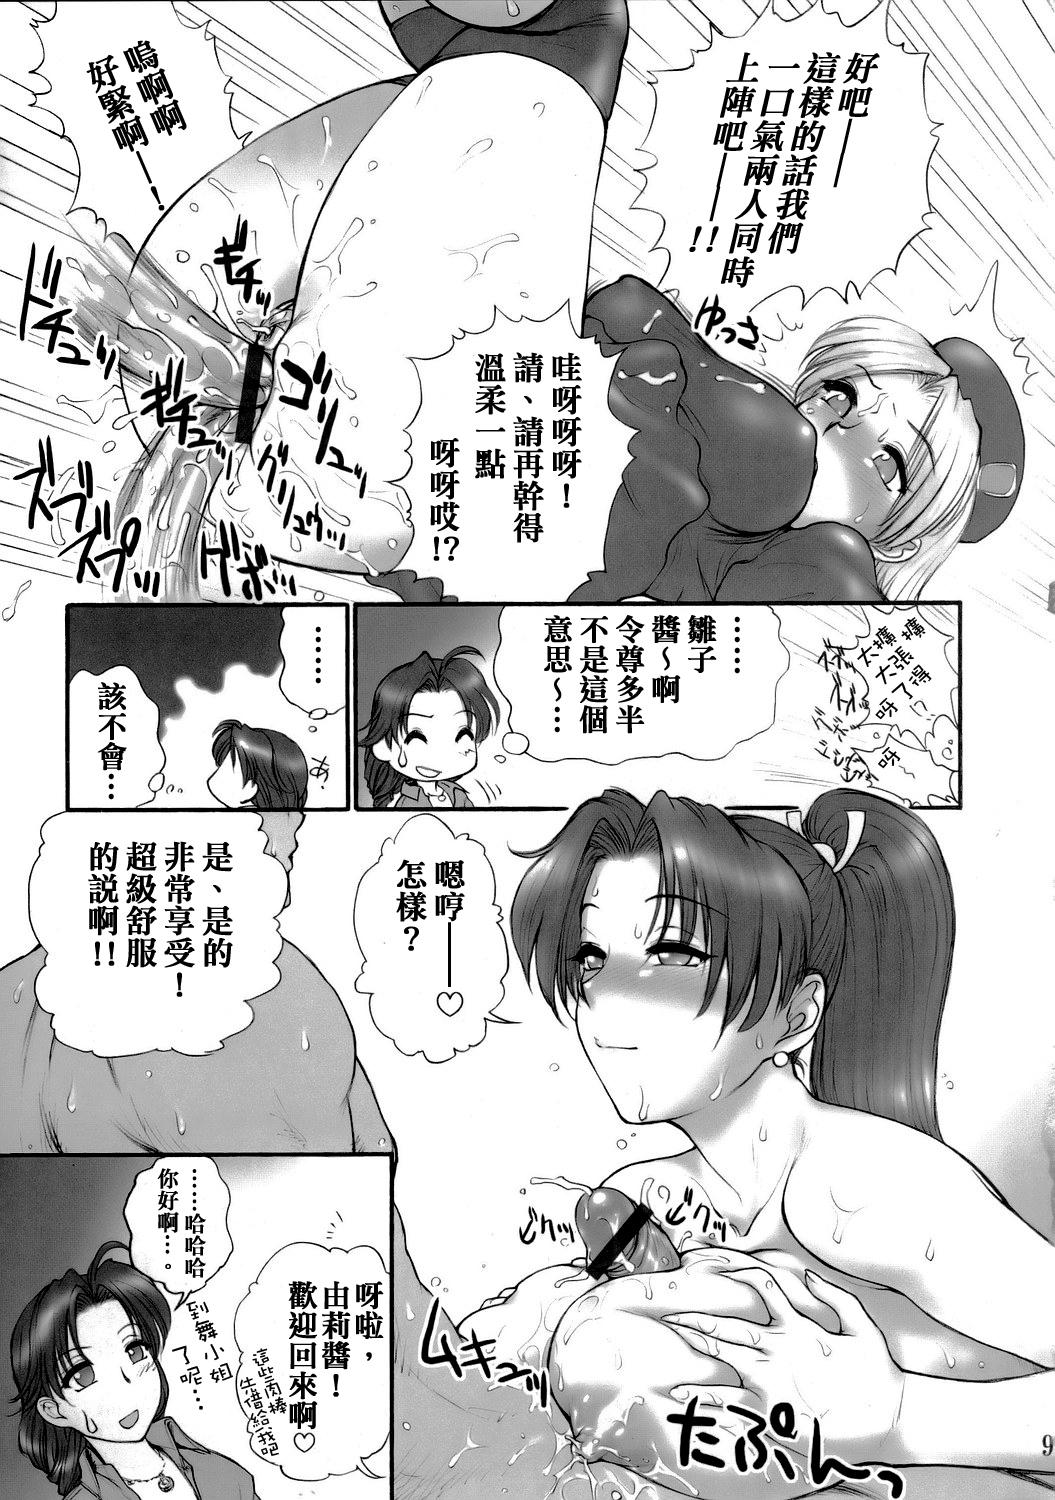 Bigbutt (SC29) [Shinnihon Pepsitou (St. Germain-sal)] Report Concerning Kyoku-gen-ryuu (The King of Fighters) [Chinese] [日祈漢化] - King of fighters Eurobabe - Page 11